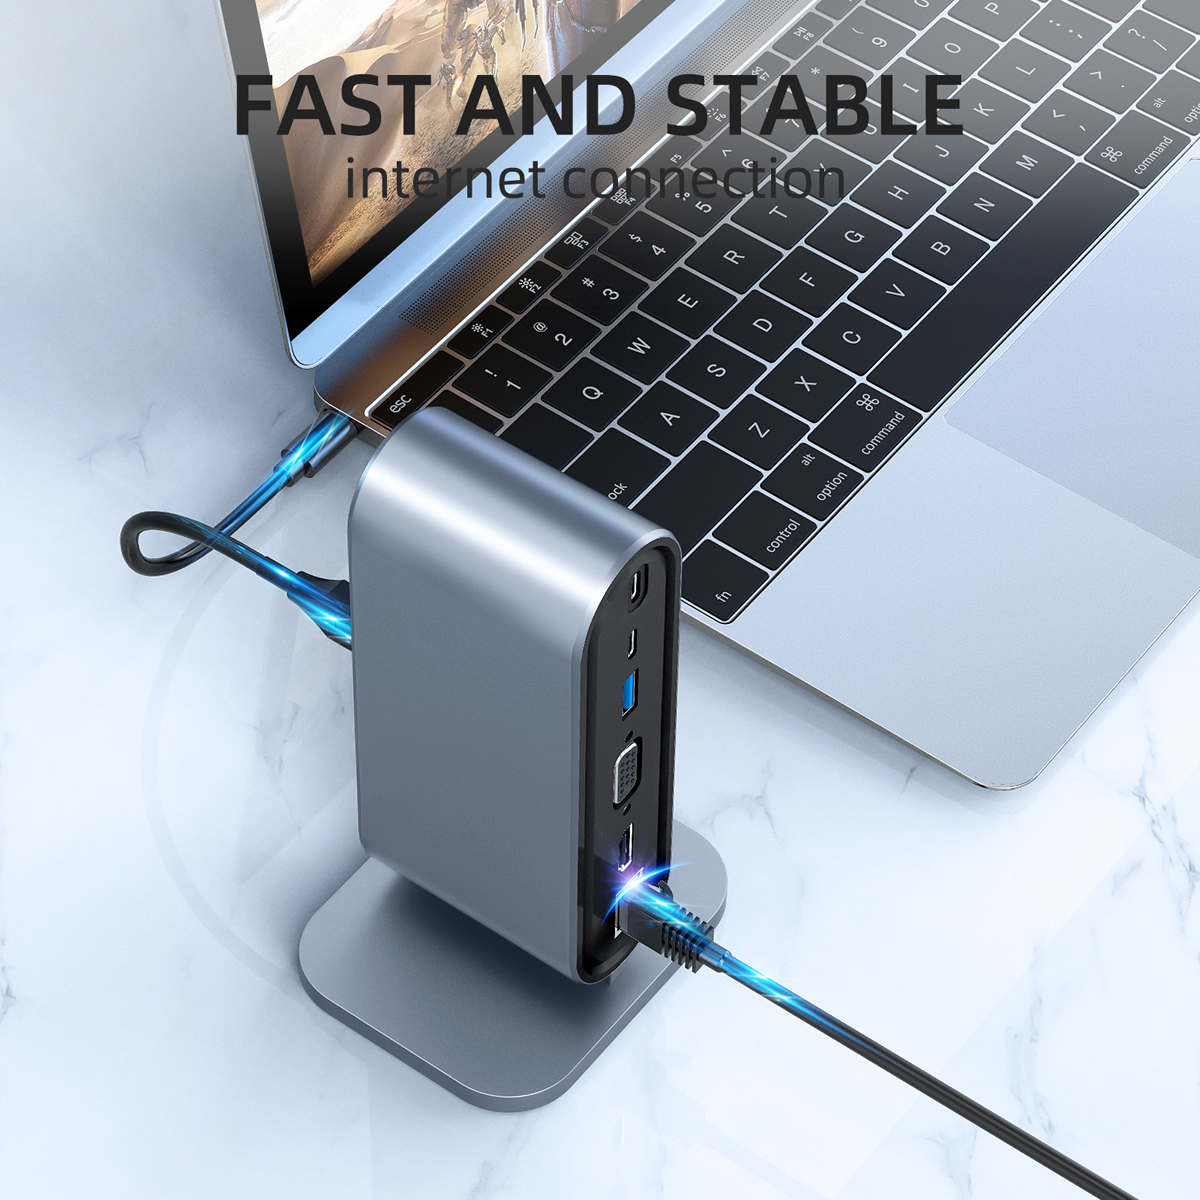 13 In 1 USB-C Hub Docking Station Adapter with 1 * USB 3.0/3 * USB 2.0/100W Type-C PD/3 * Type-C/4K HD Display Video Outputs/RJ45 Internet Port/3.5mm Audio Jack/VGA/SD TF Memory Card Readers